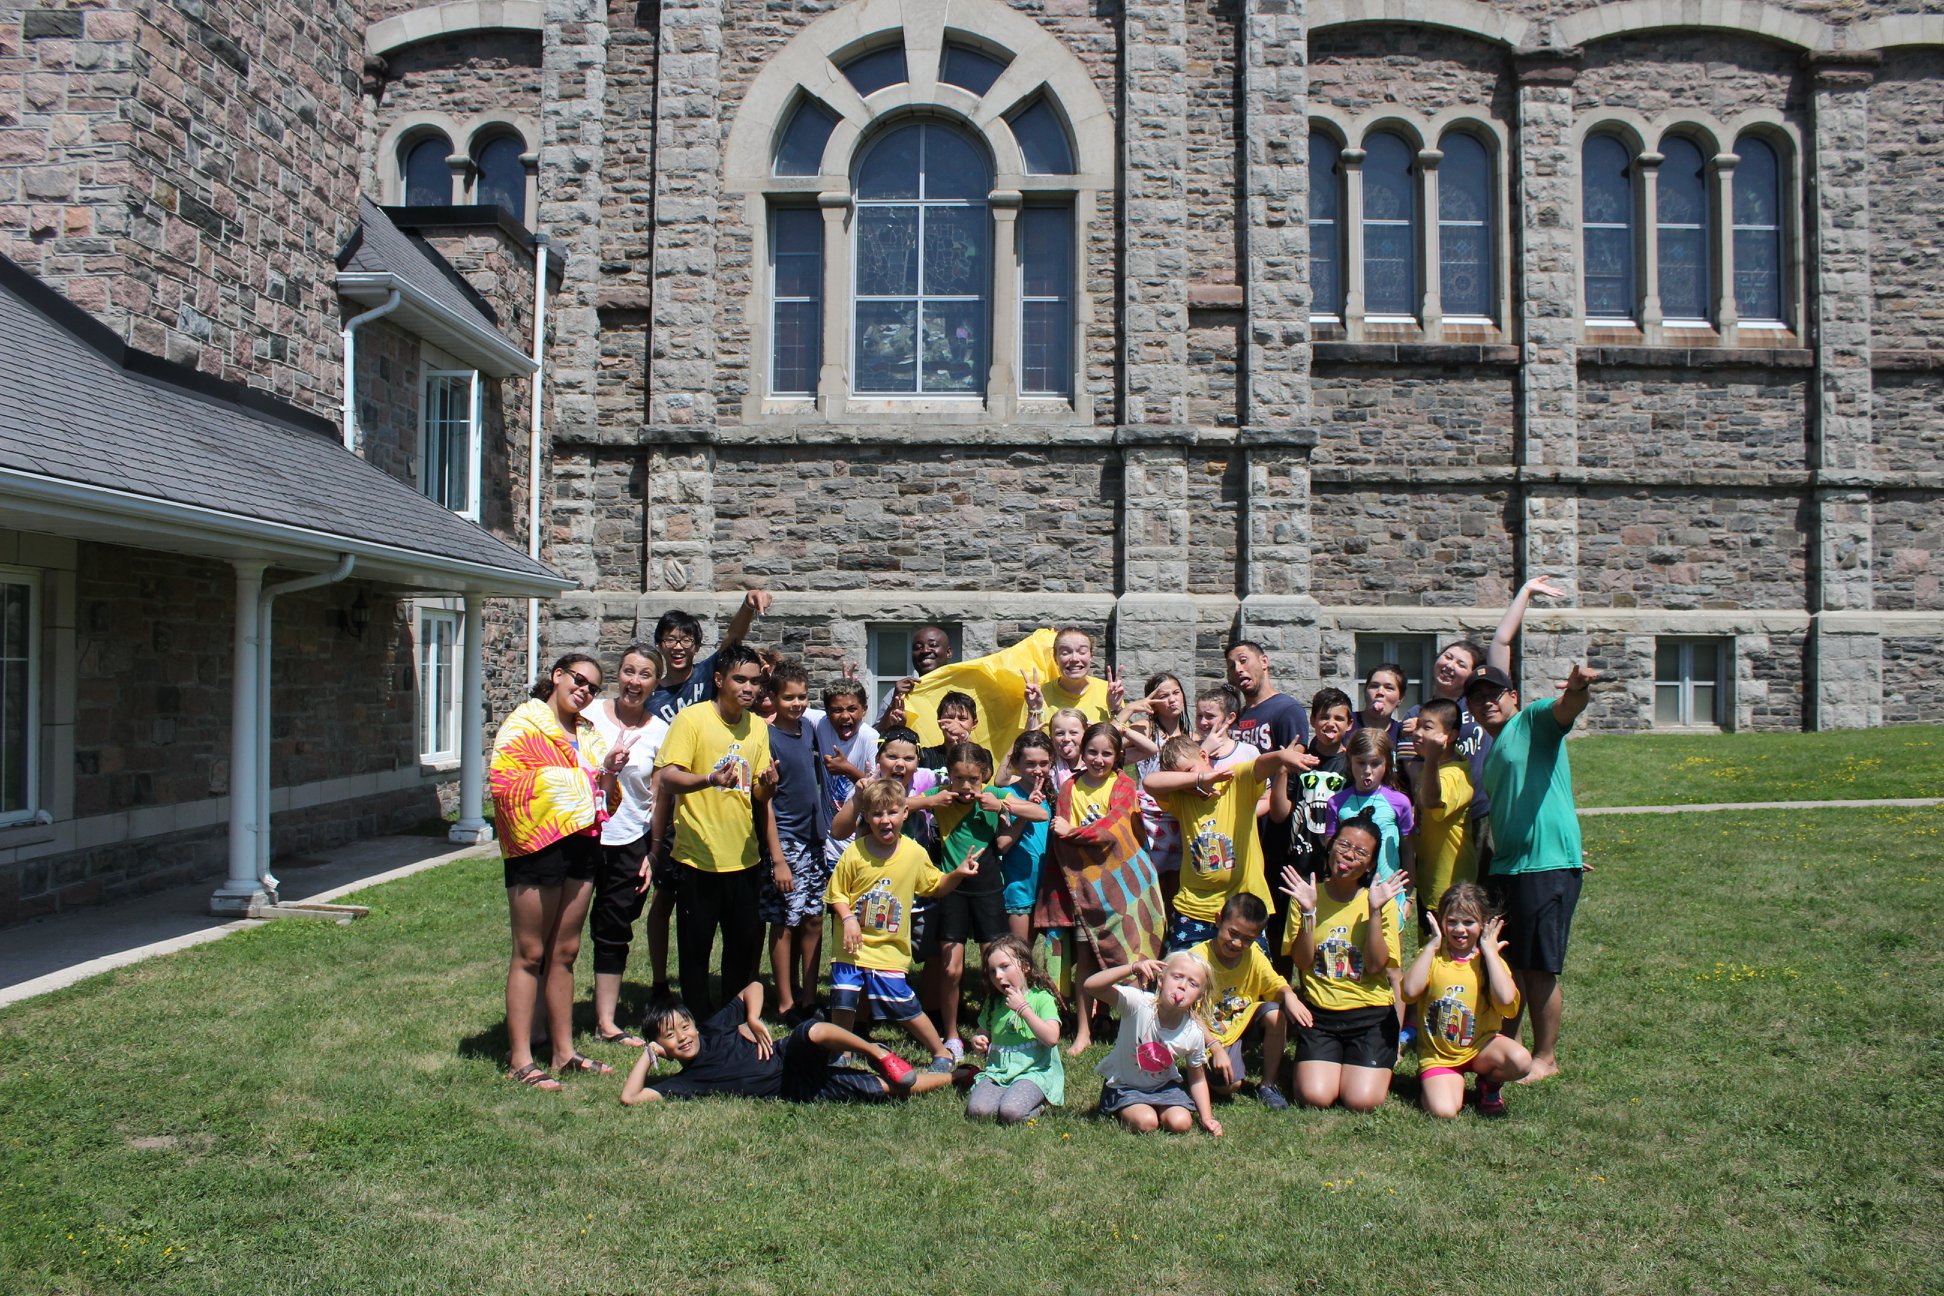 Group photo of campers at the end of the week of Totus Tuus Summer Camp after the Friday Water/ Slime Fight